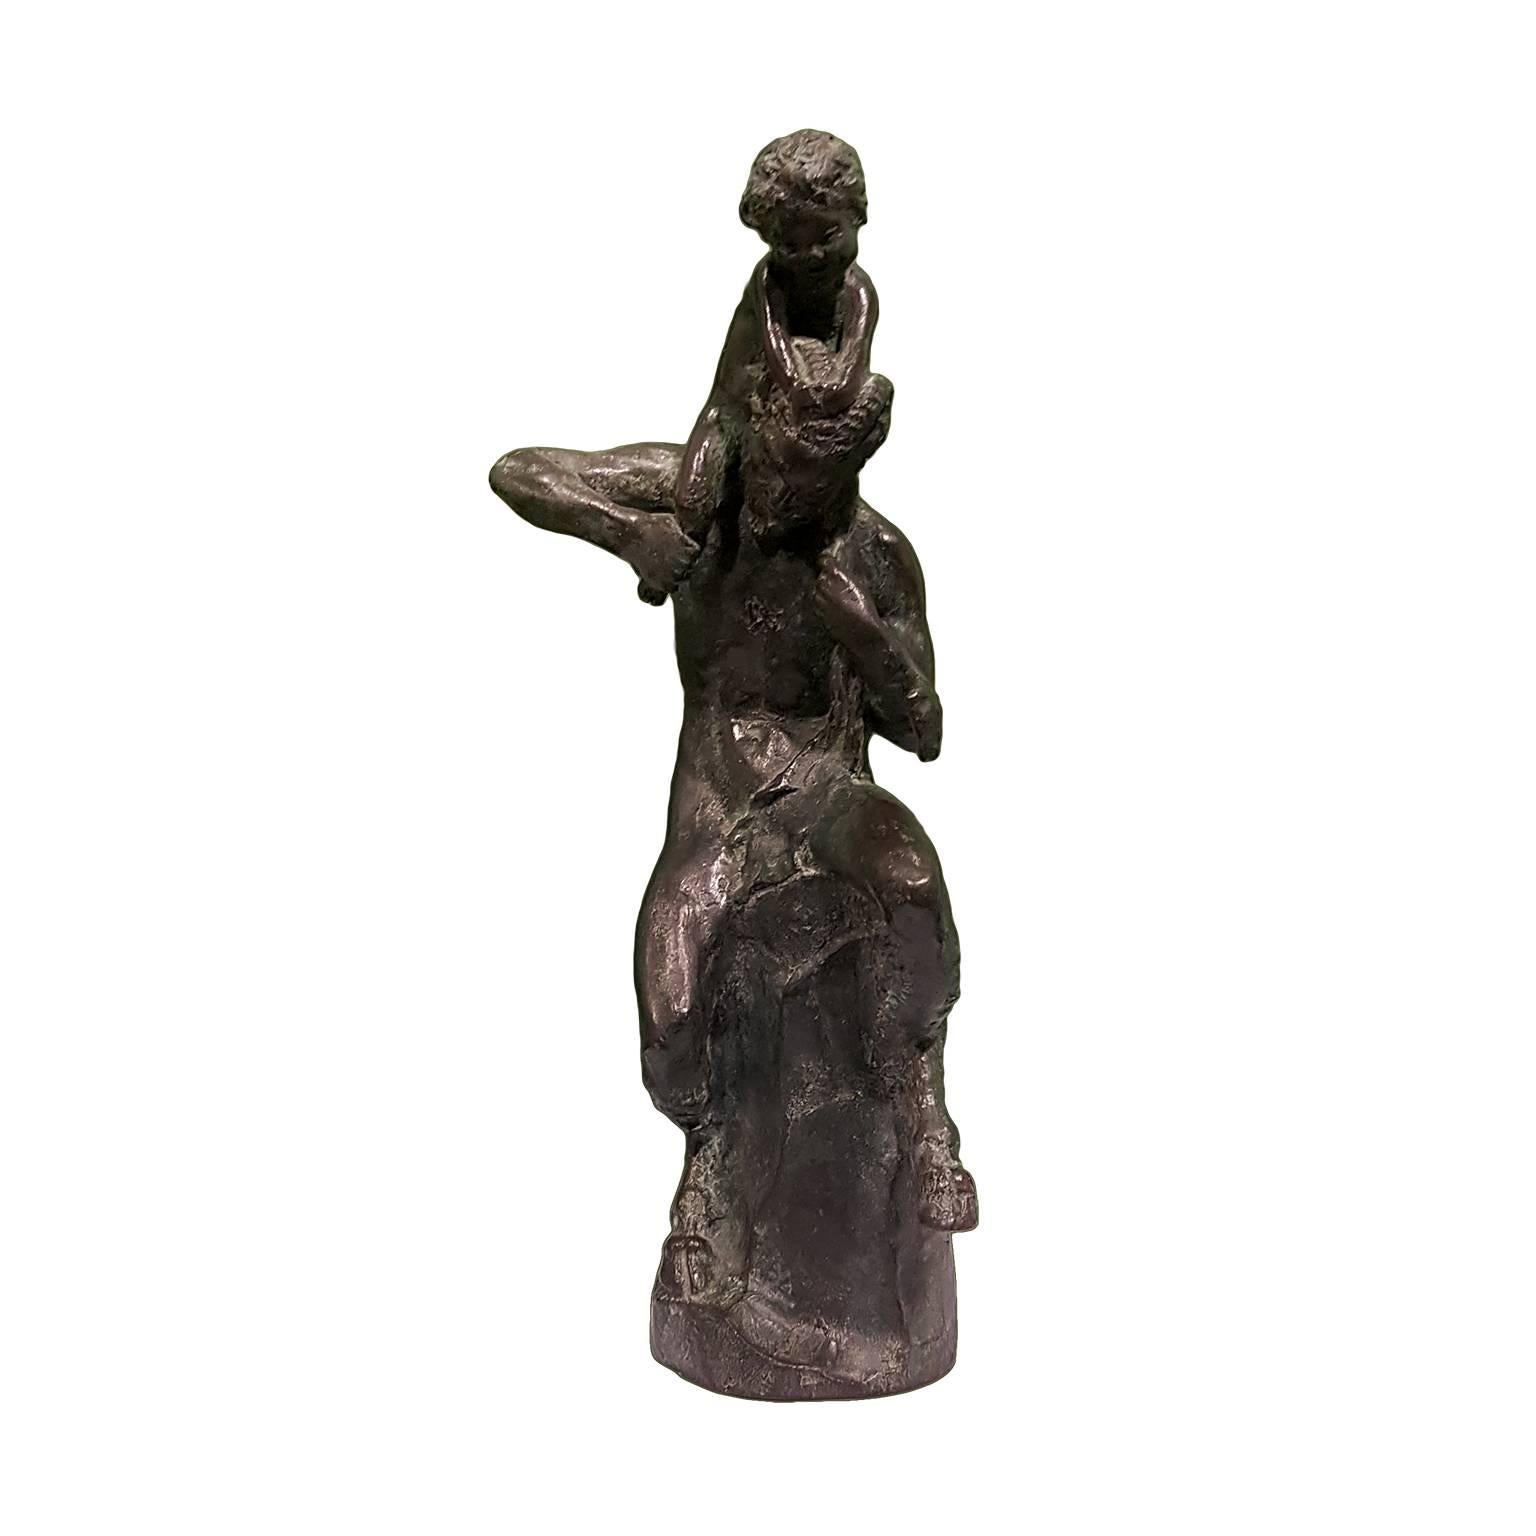 Satyr sculpture with a little faun on his shoulders, signed and numbered by Mistruzzi. 

The sculpture belongs to an edition of 100 pieces.
Aurelio Mistruzzi, an Italian sculptor and medalist, is well known for having made numerous Monument to